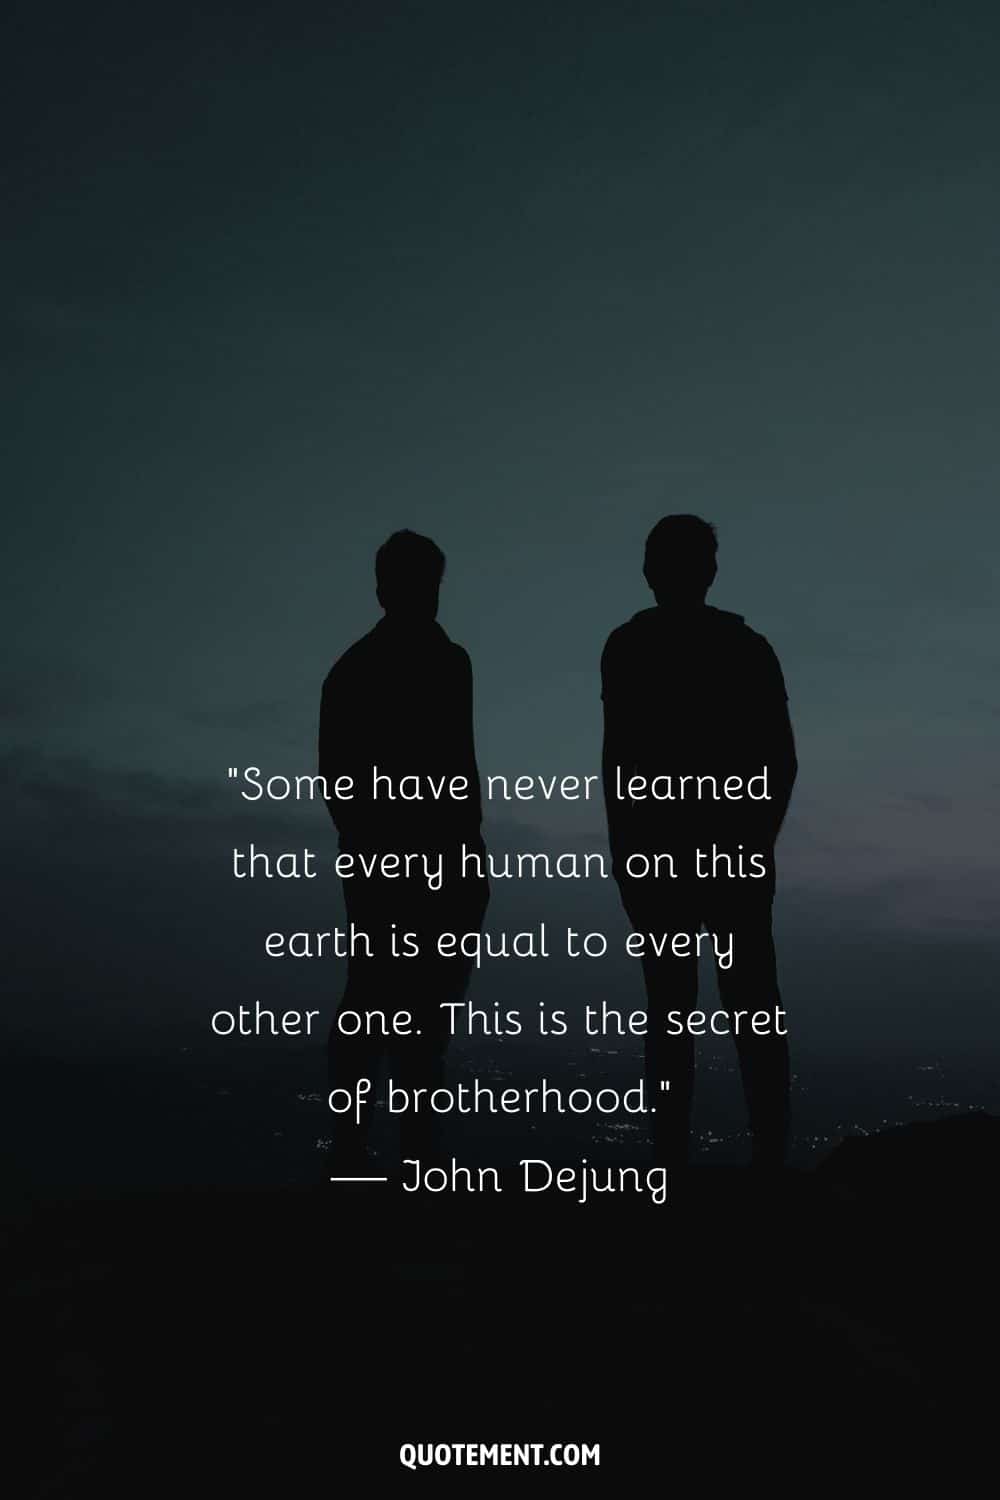 “Some have never learned that every human on this earth is equal to every other one. This is the secret of brotherhood.” — John Dejung